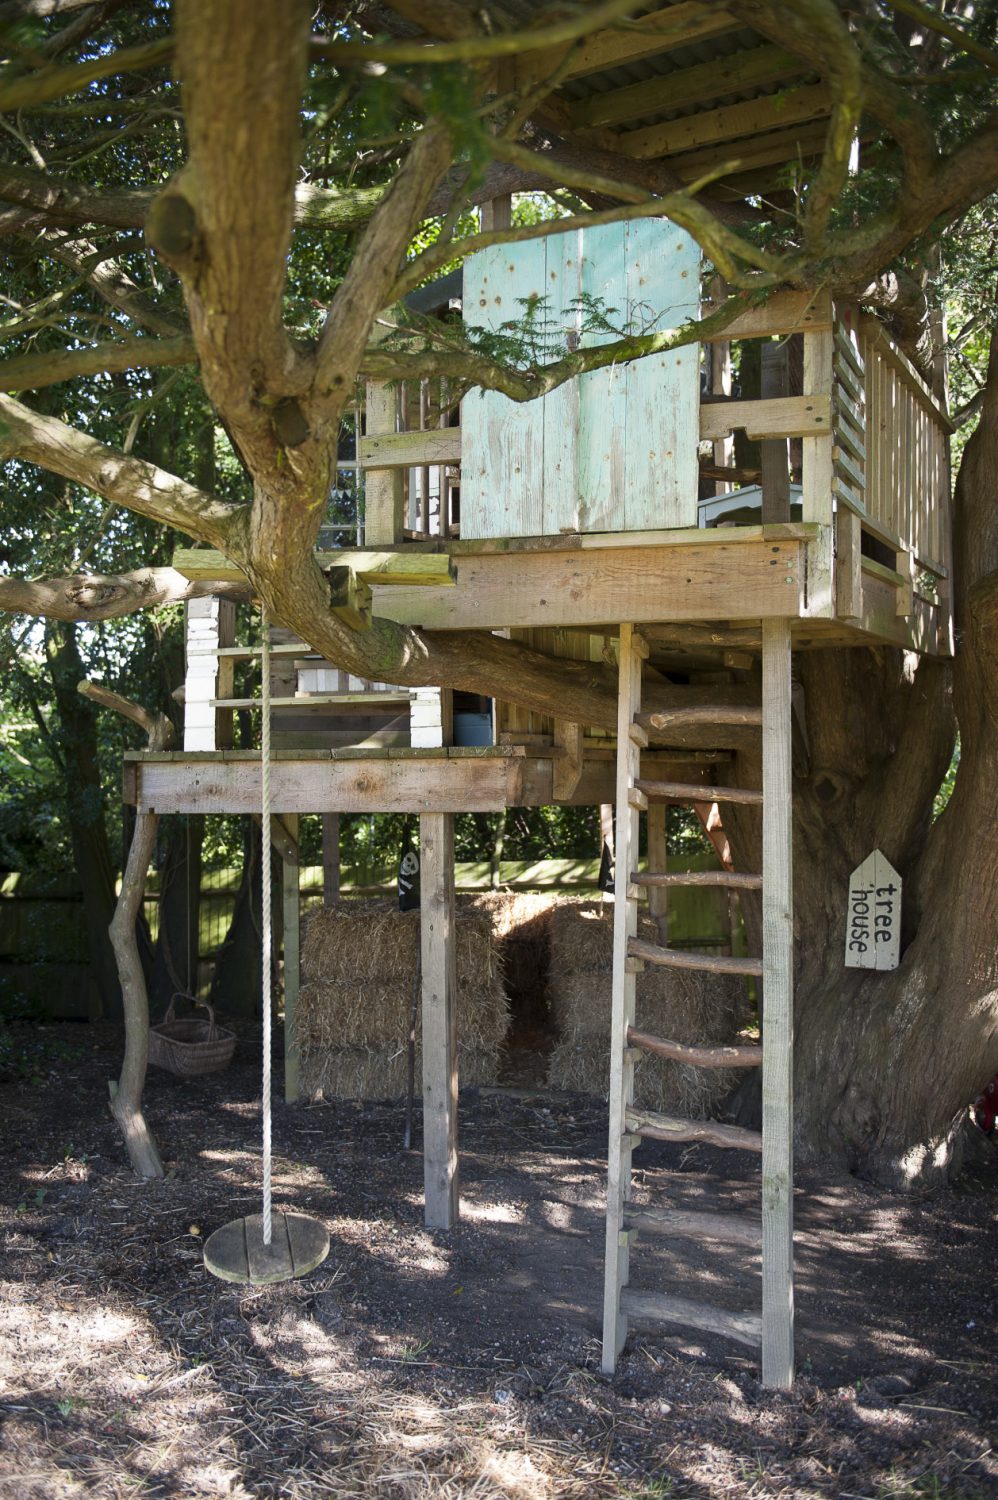 In the garden, an impressive treehouse was built by Rupert Walton, the children’s godfather. There is both a rustic ladder and a staircase to the deck and the little cabin has been beautifully constructed from reclaimed materials including a fine Regency style arched window